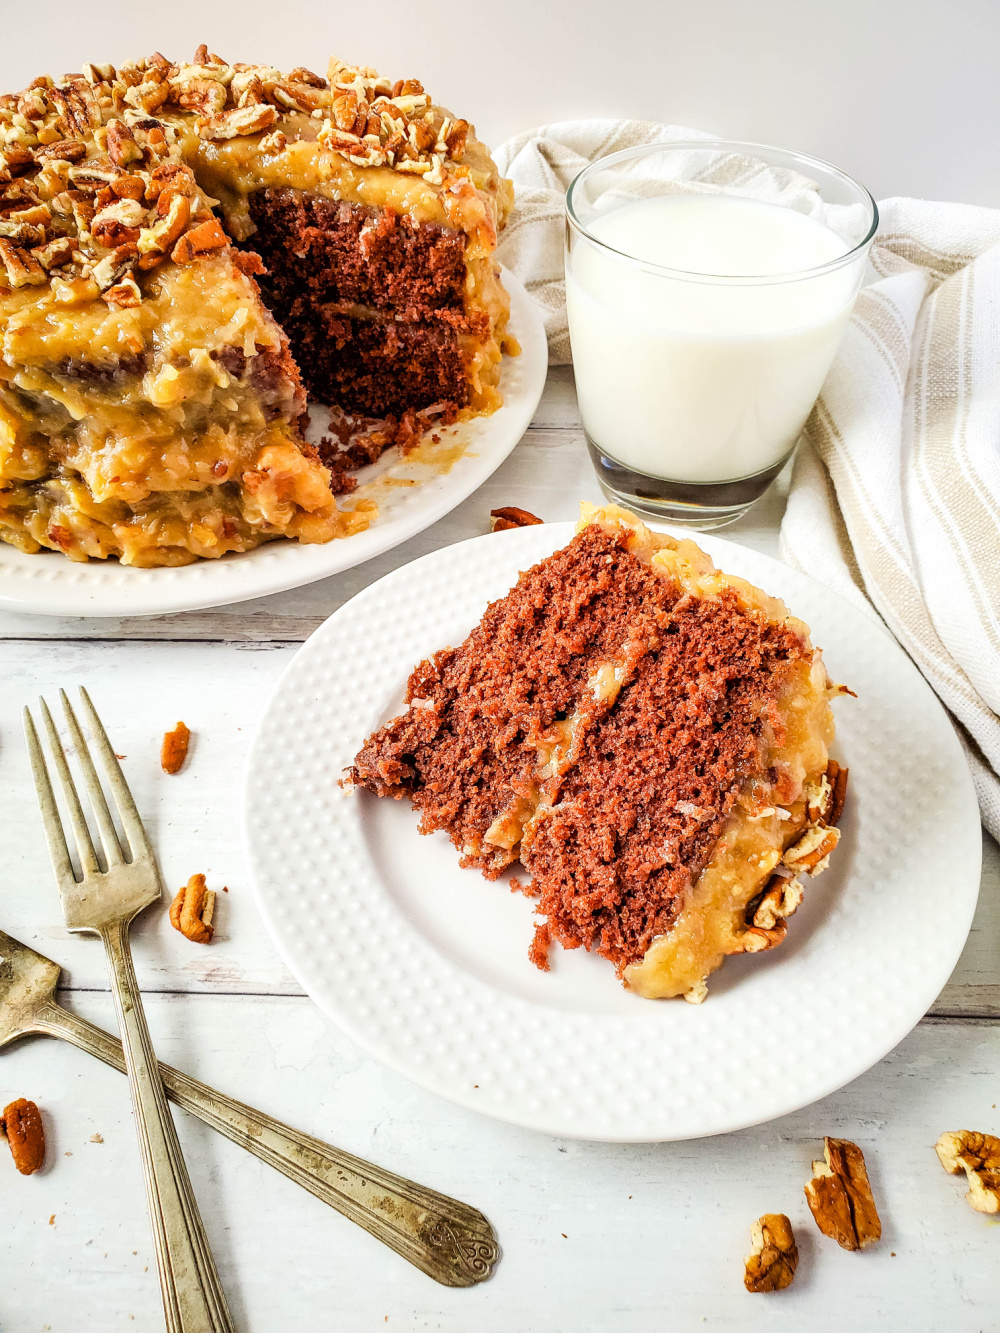 Homemade German Chocolate Cake with Coconut Pecan Frosting